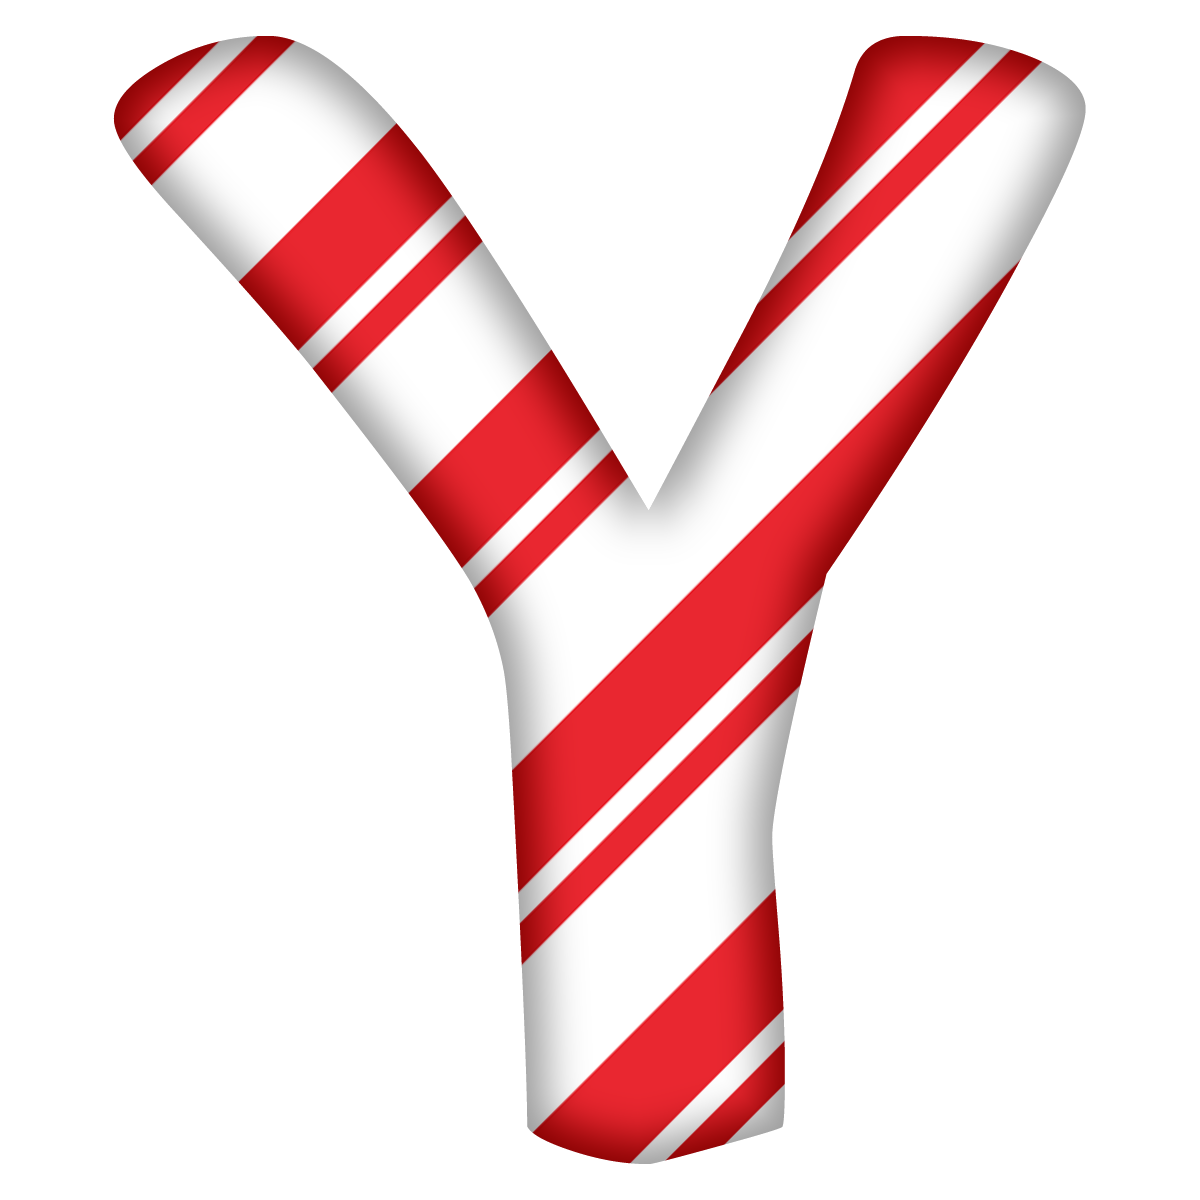 letter clipart candy cane